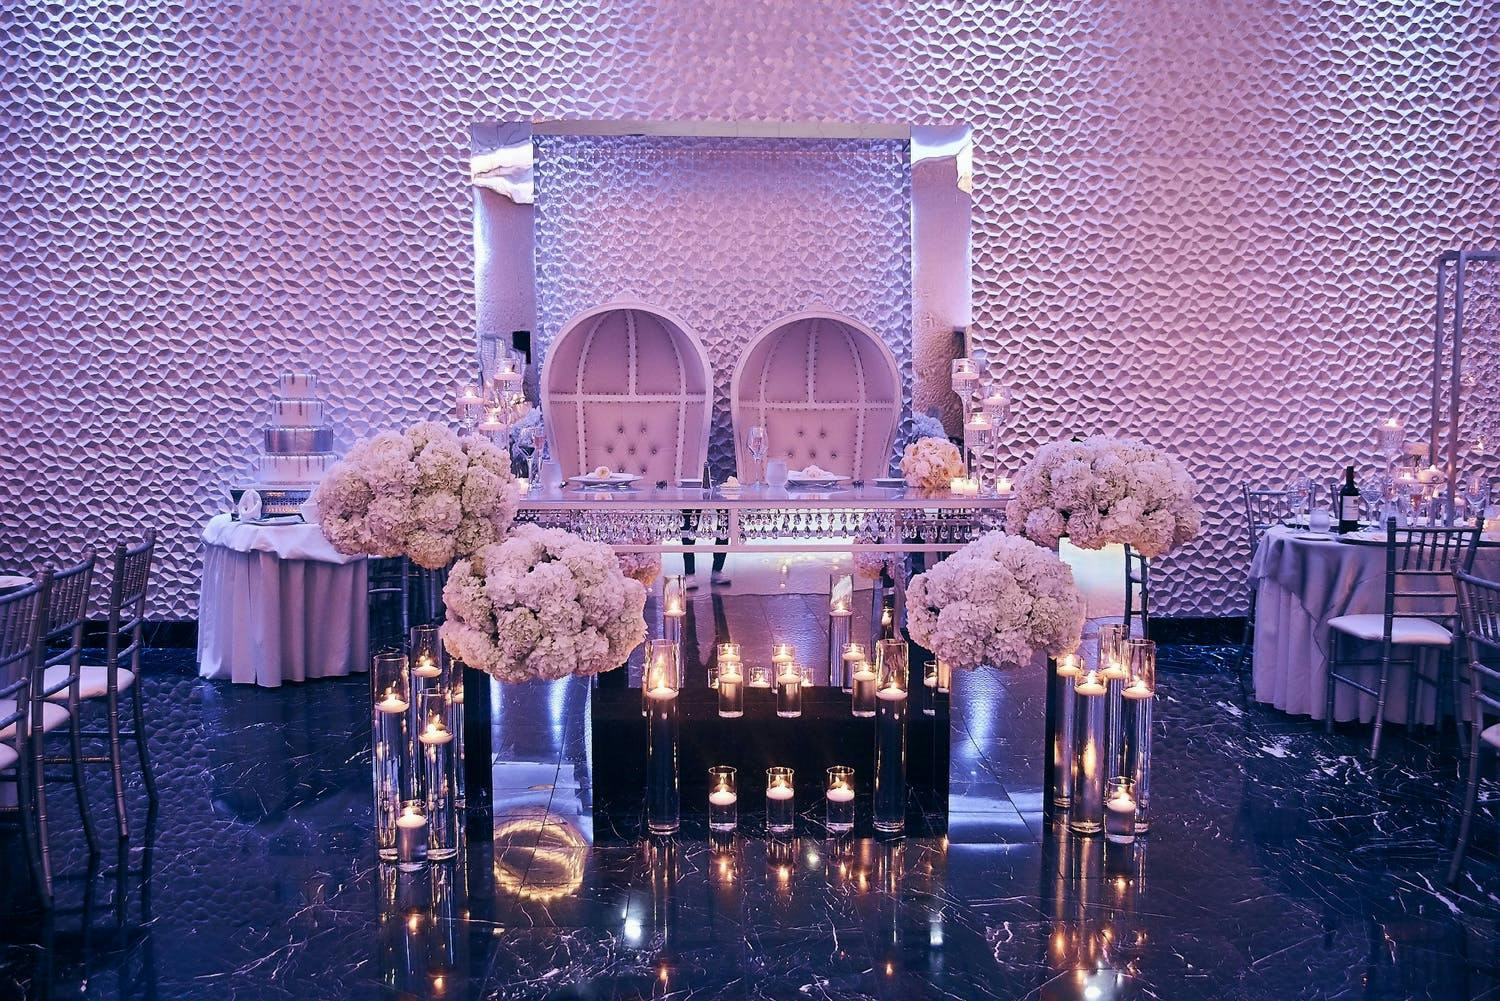 Purple Uplit Wedding With Modern Sweetheart Table Featuring Mirrored Elements, Candlelight, and Unique Seating | PartySlate